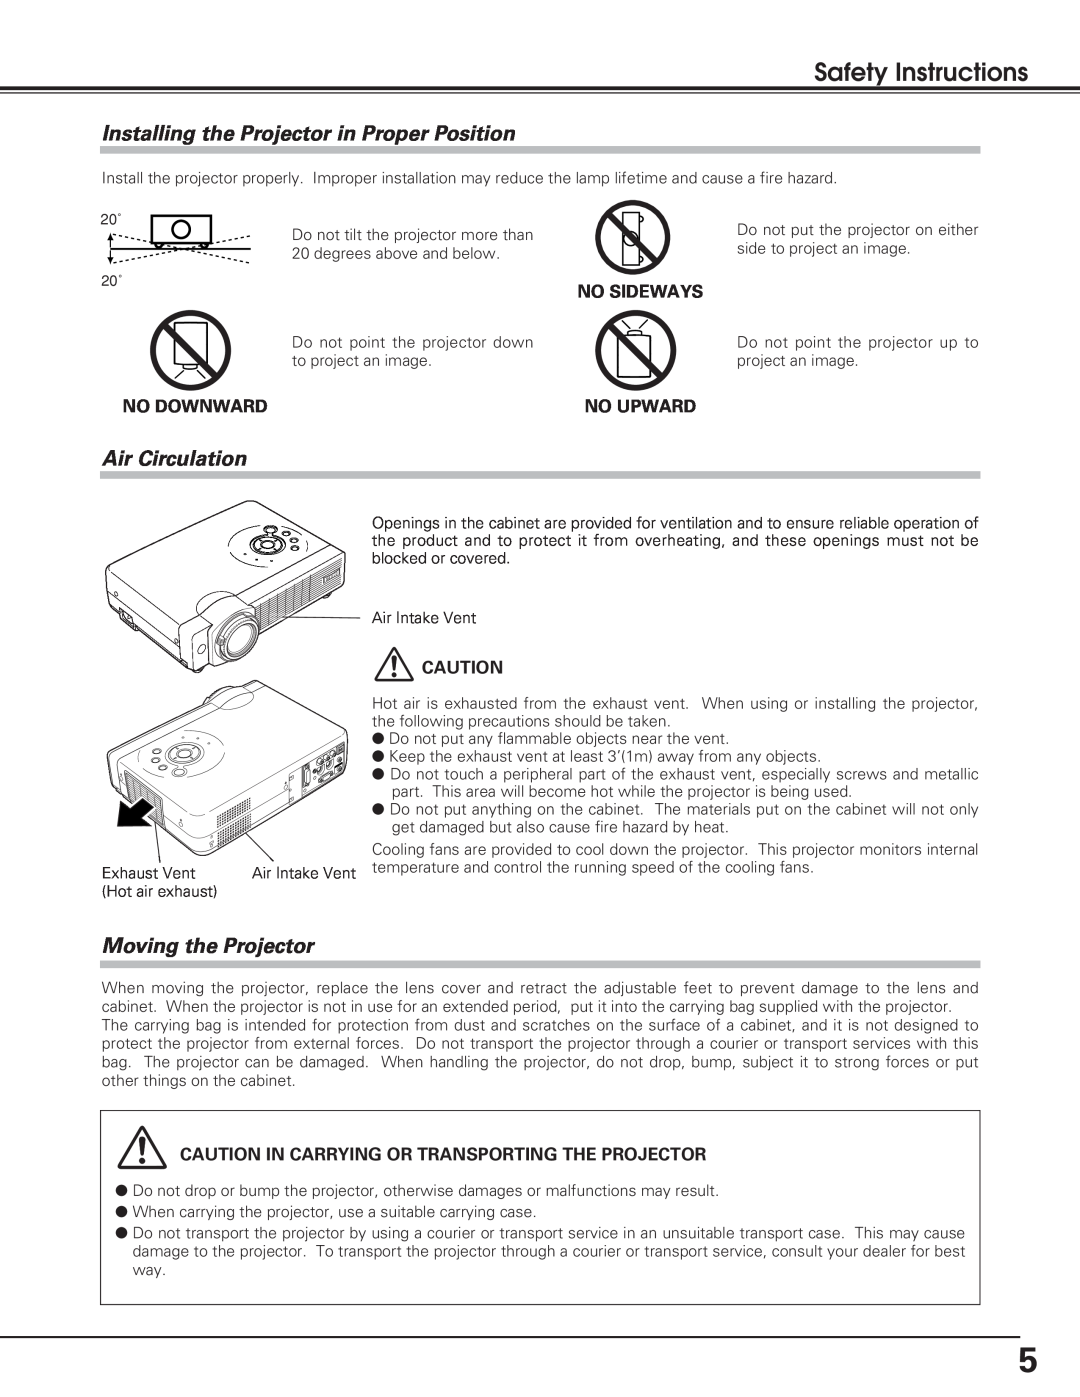 Eiki LC-XB15 Safety Instructions, Installing the Projector in Proper Position, Air Circulation, Moving the Projector 